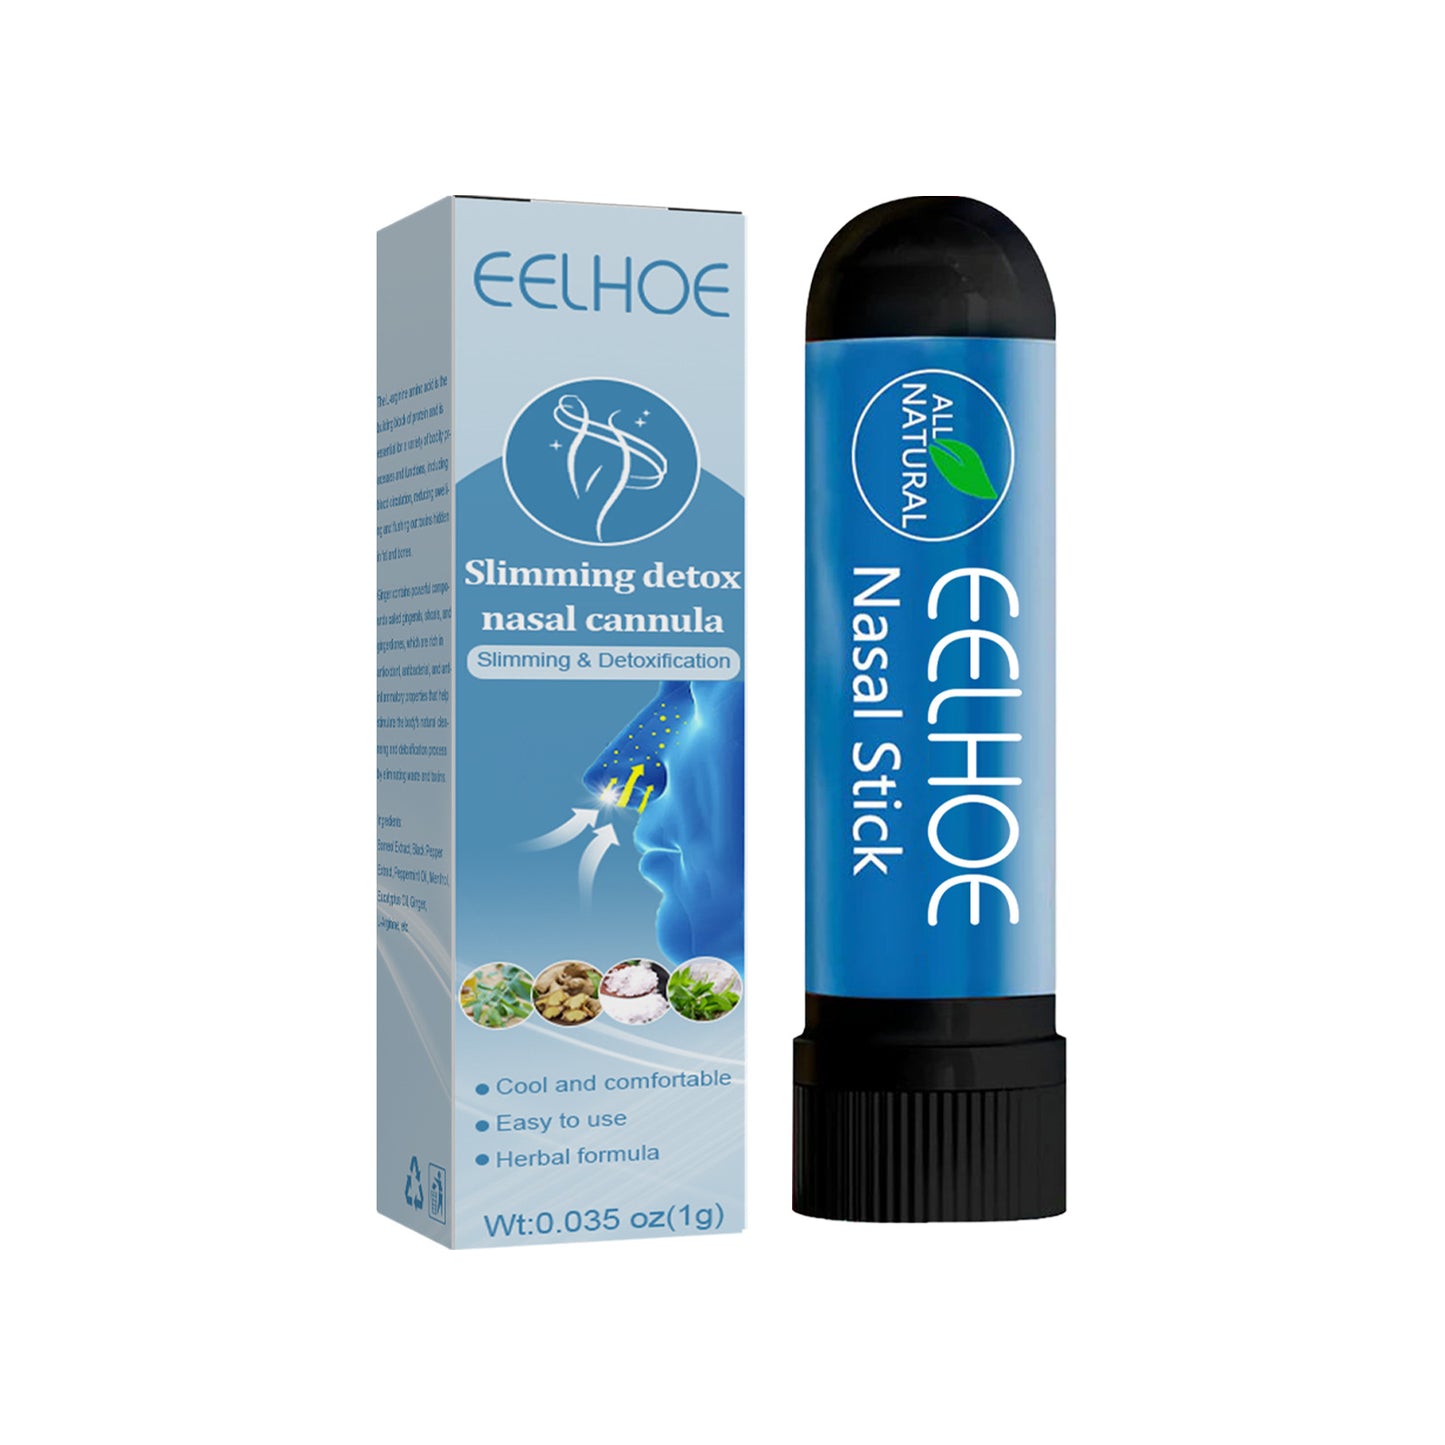 EELHOE Slimming Detox Nasal Cannula Stick Nose Inhaler Cream Refreshing Cool Body Sculpting Tighten Thigh Muscles Herbal Essential Oil